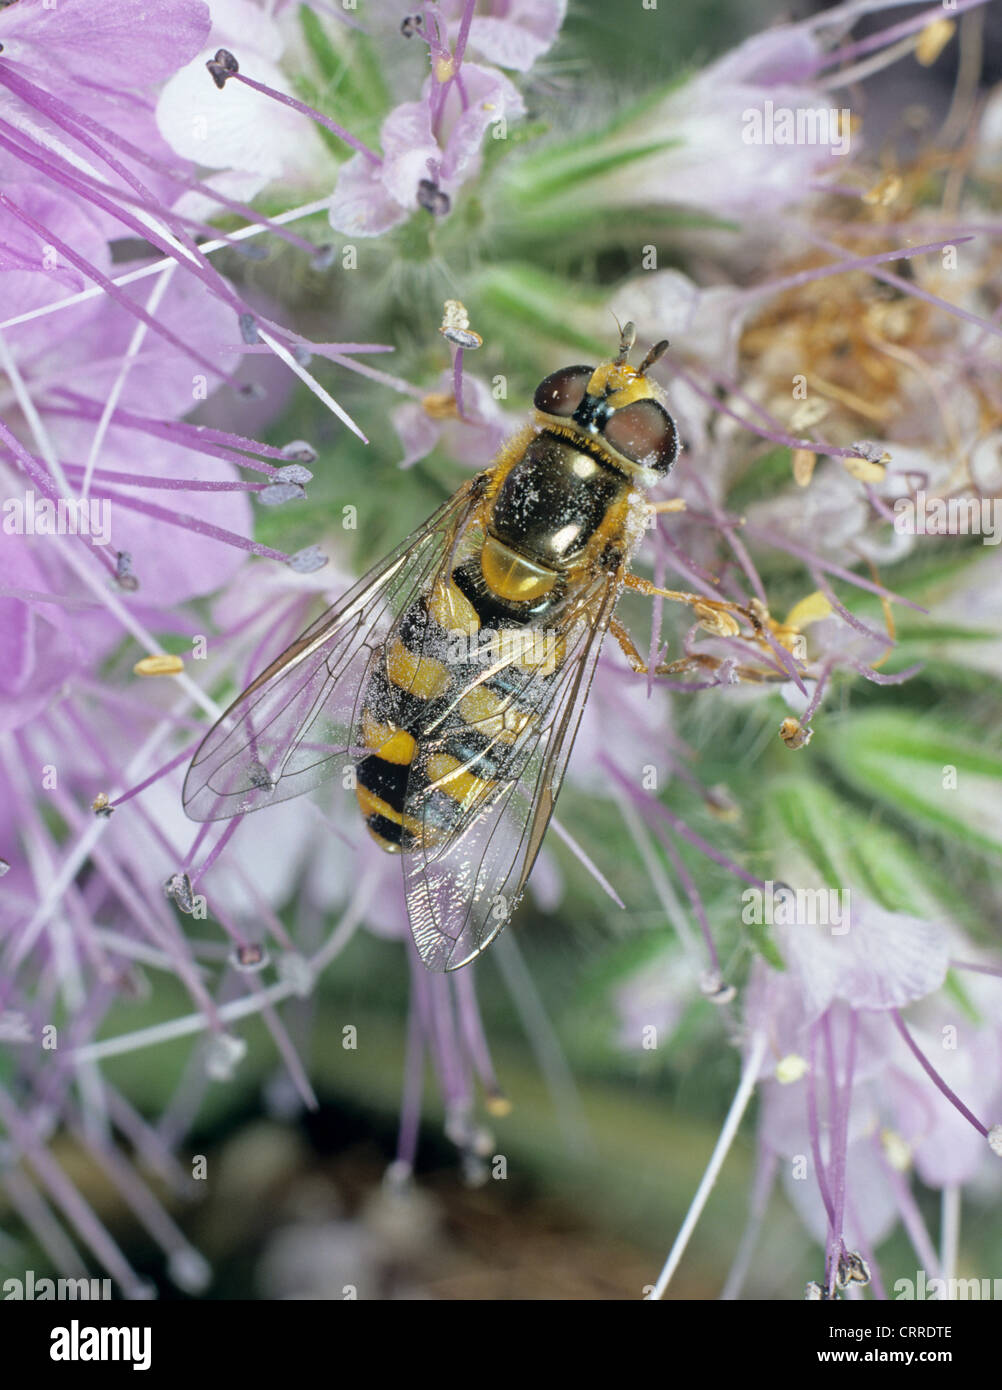 Hover-fly (Syrphus ribesii) on a phacelia flower Stock Photo